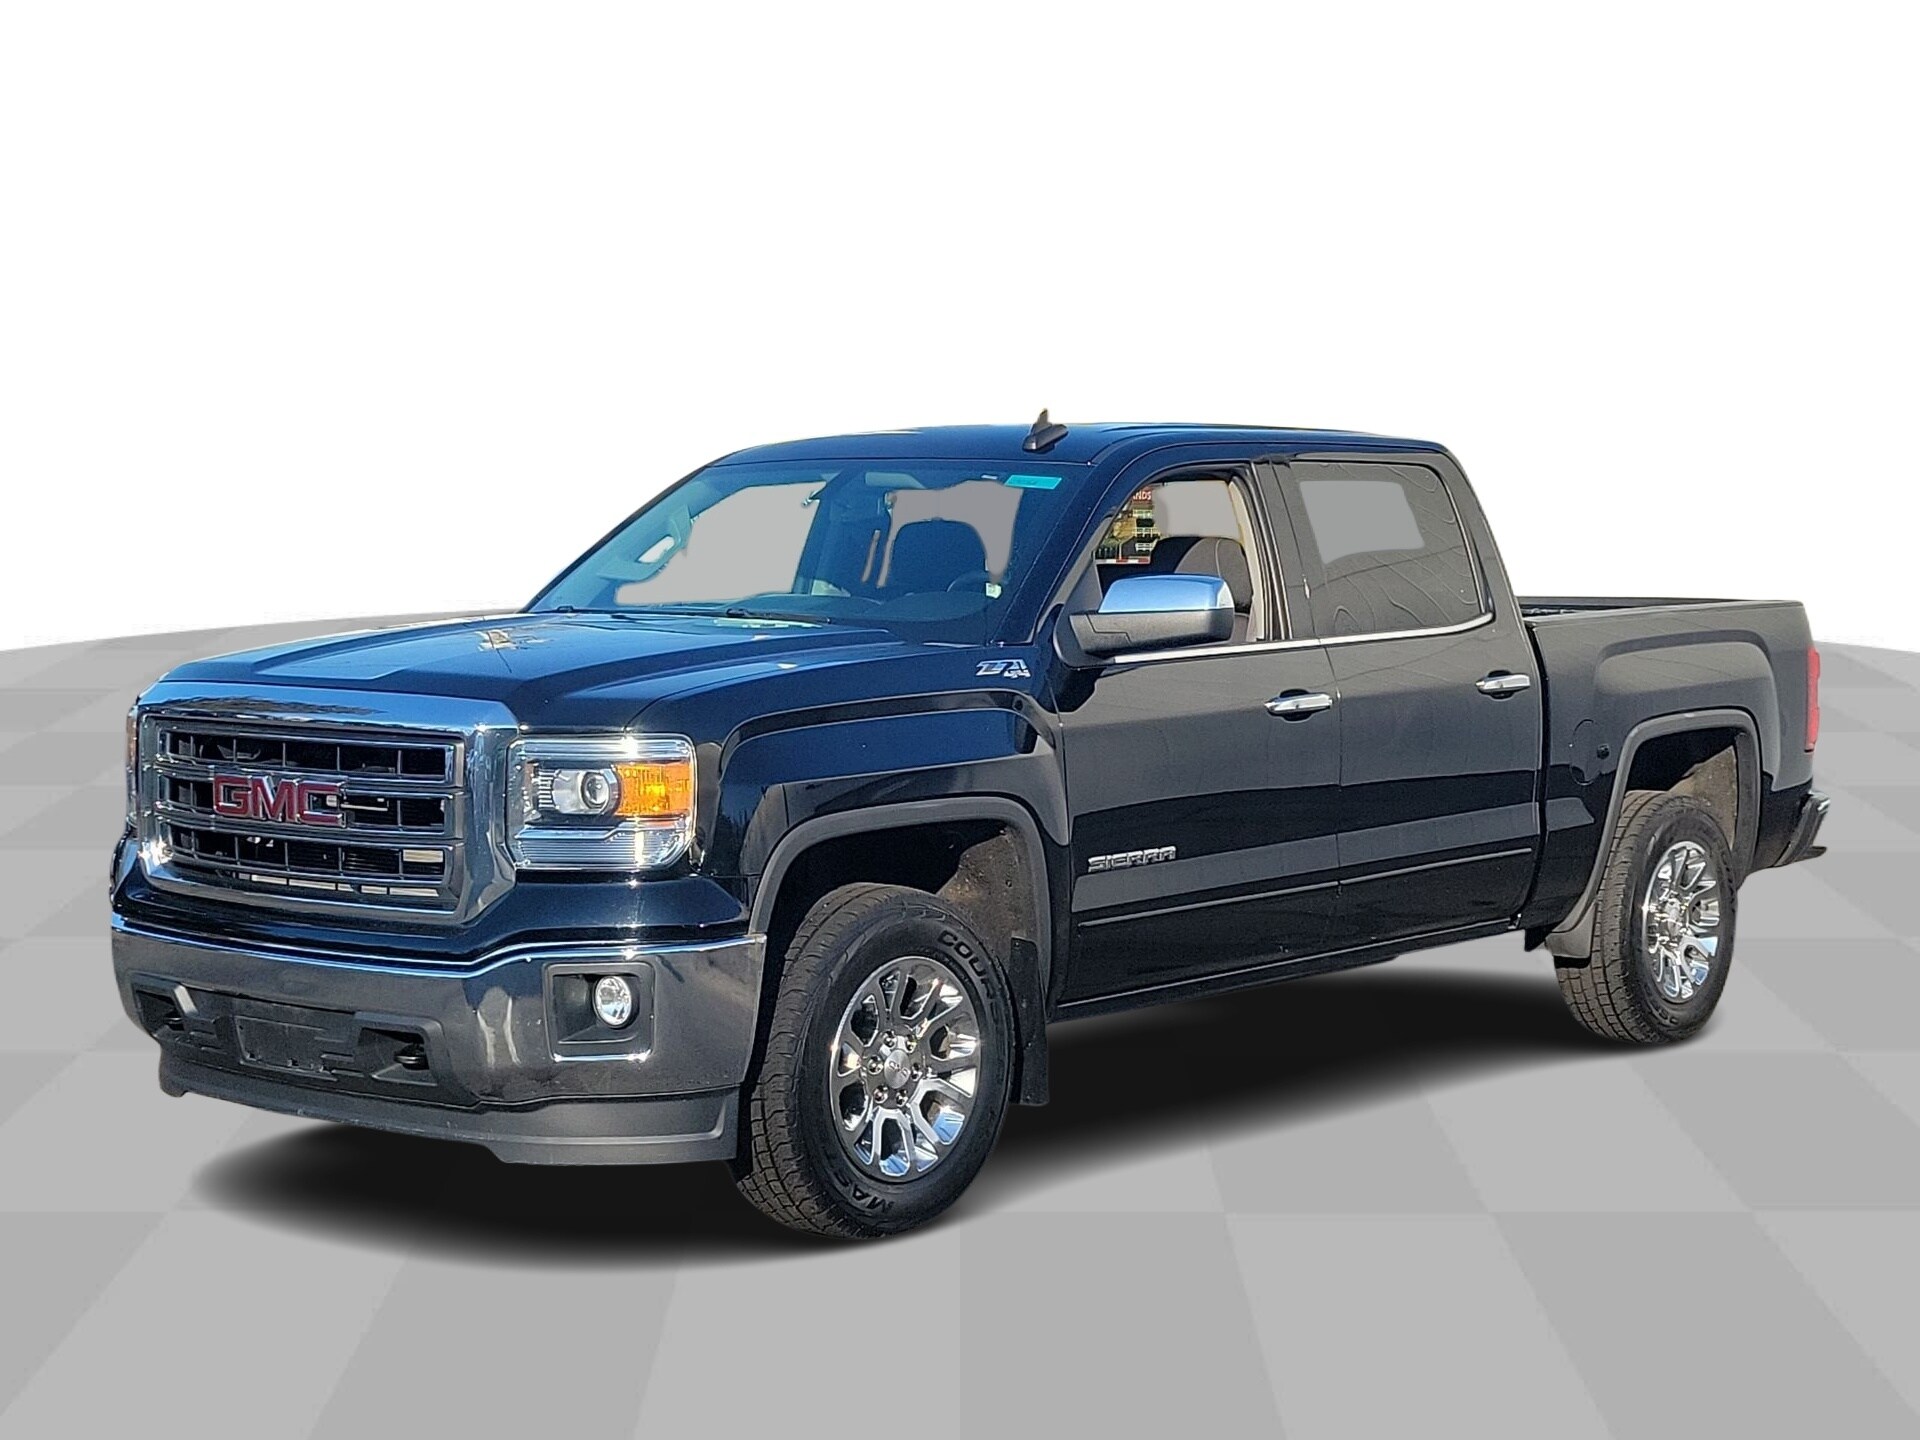 Used 2015 GMC Sierra 1500 For Sale at Sullivan Automotive Group